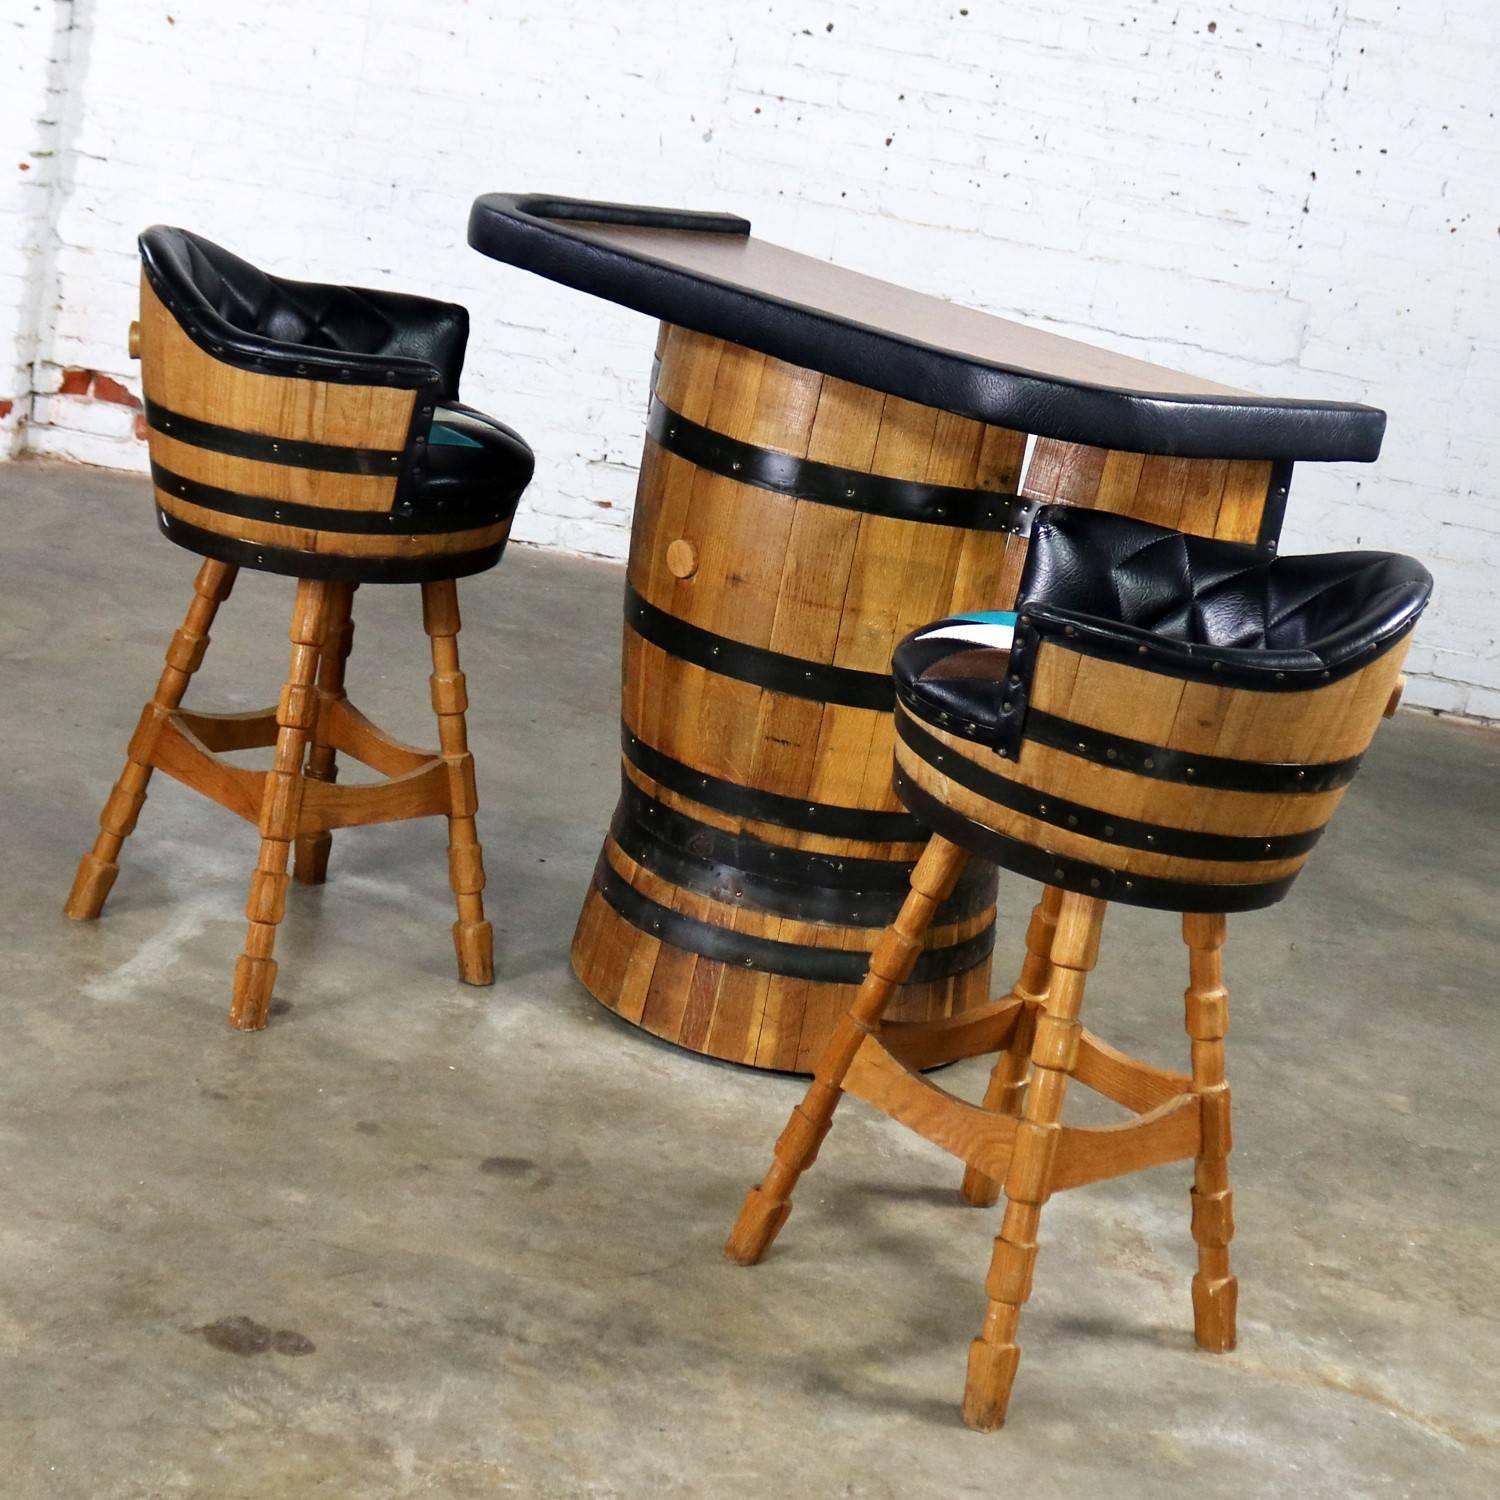 Midcentury Whiskey Barrel Bar and Swivel Bar Stools by Brothers of Kentucky 1